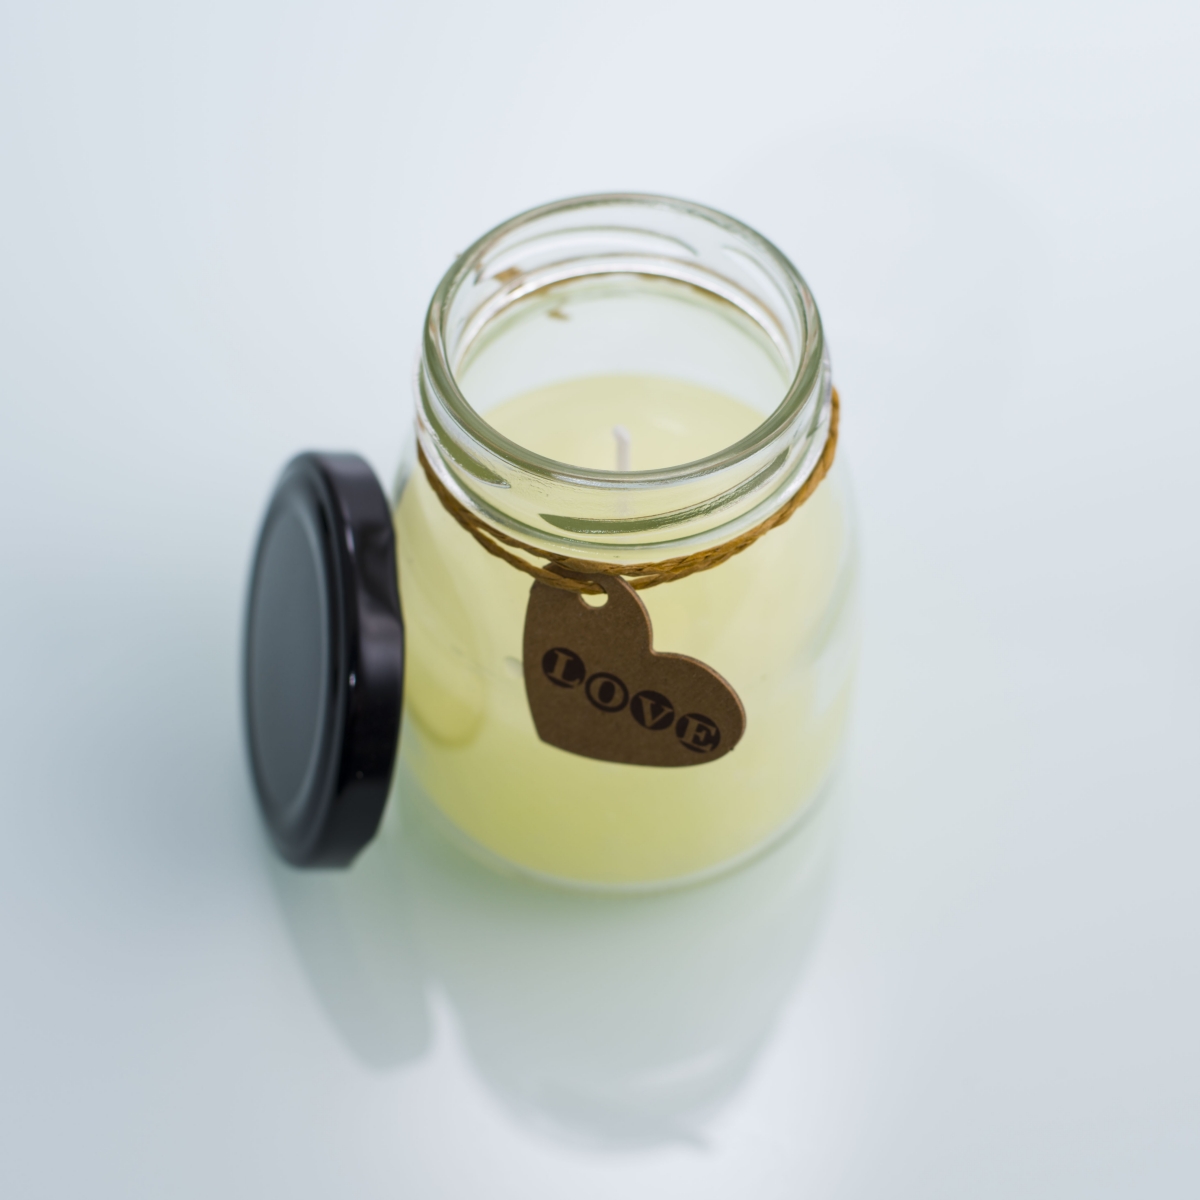 Vegan Candles- Best Soy Wax ,Clear Pudding Glass Jar ,Metal Lid ,Jasmine & Lily ,China Factory ,Price-HOWCANDLE-Candles,Scented Candles,Aromatherapy Candles,Soy Candles,Vegan Candles,Jar Candles,Pillar Candles,Candle Gift Sets,Essential Oils,Reed Diffuser,Candle Holder,